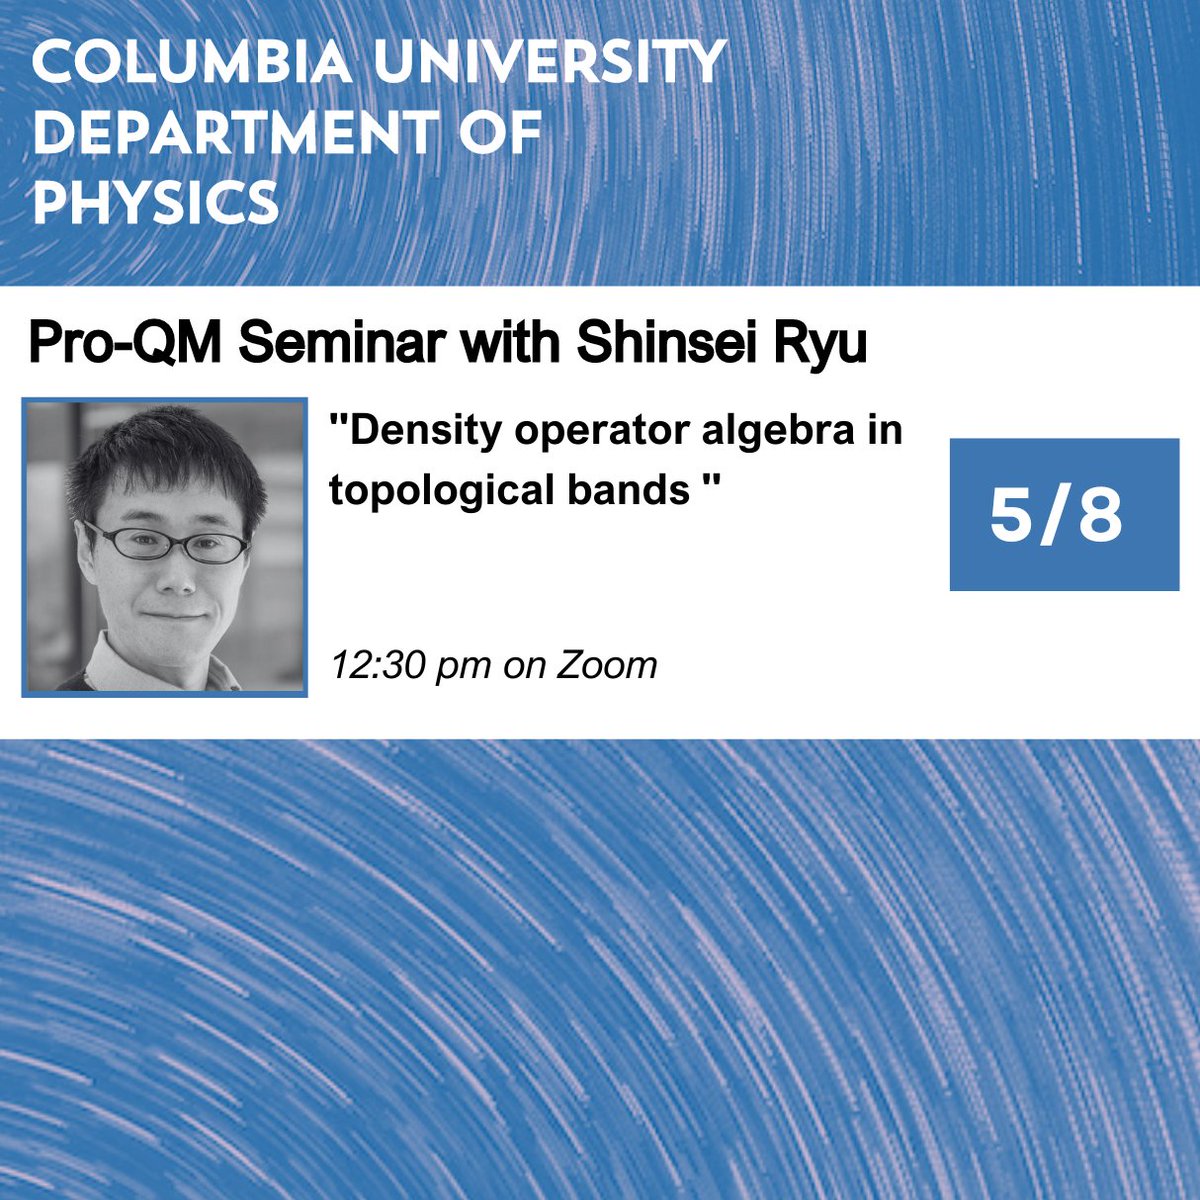 Join us next week for a Pro-QM Seminar with Shinsei Ryu on 'Density operator algebra in topological bands'! Zoom link: columbiauniversity.zoom.us/j/91963786567?…